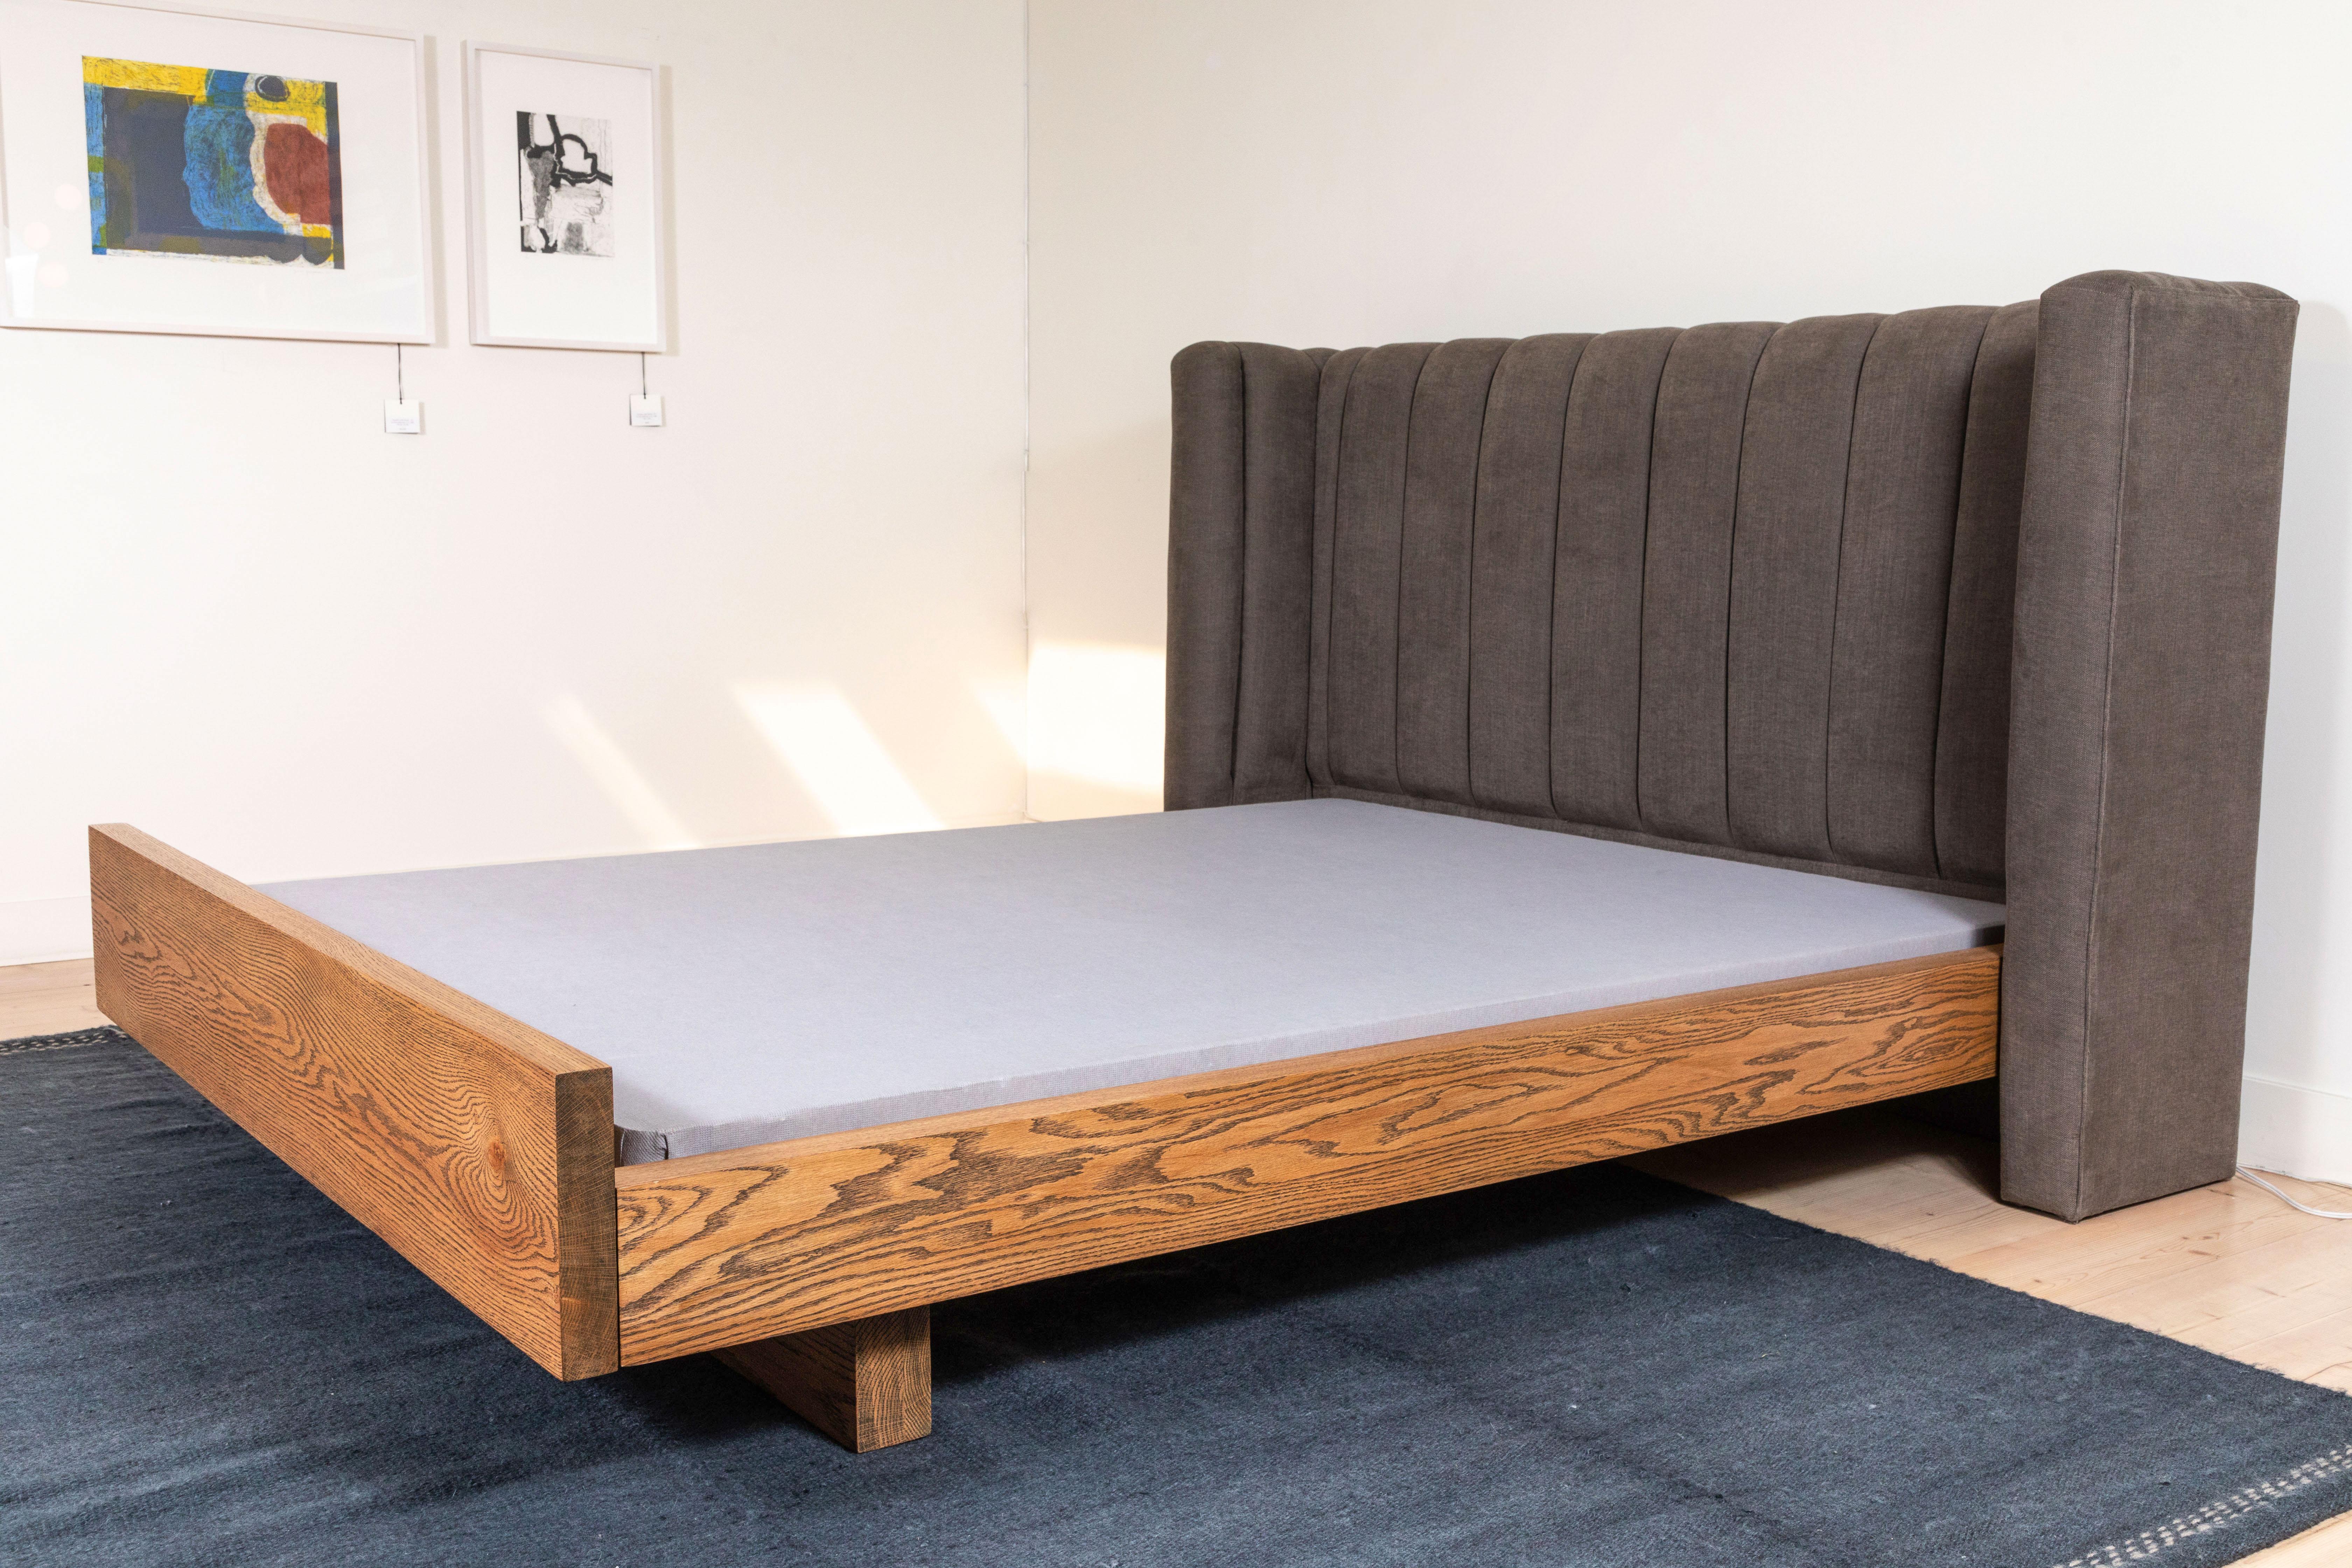 Channel Tufted Isherwood Bed with Oak Base by Lawson-Fenning, Queen 1